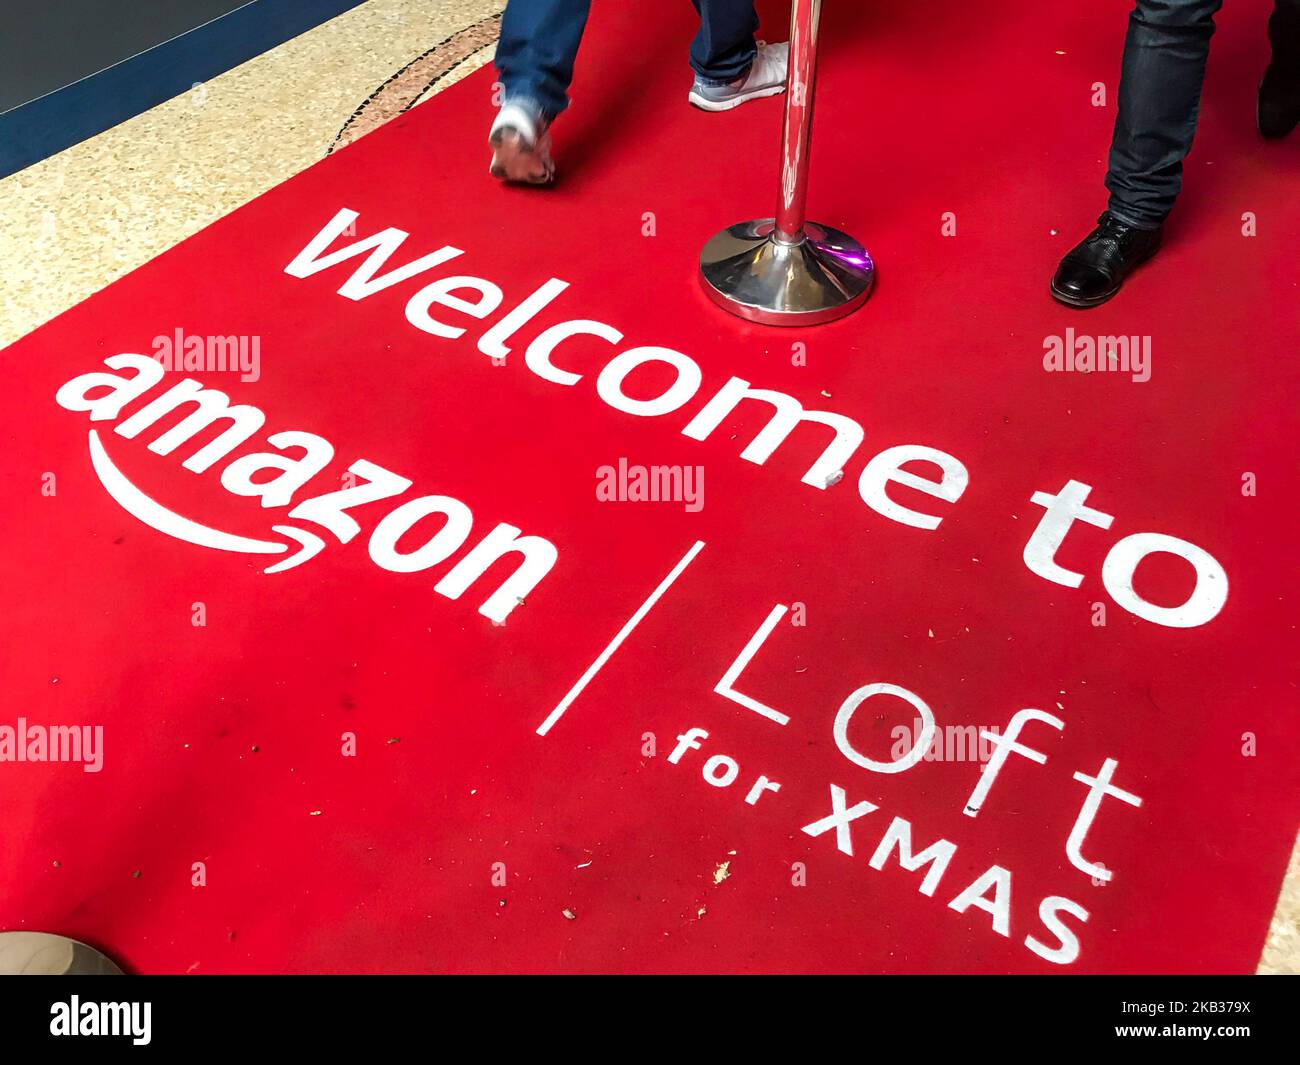 Loft for Xmas is the new pop-up store created by Amazon in Milano, Italy,  on November 16, 2018. The store will be open since November 16 to November  26, during the Black